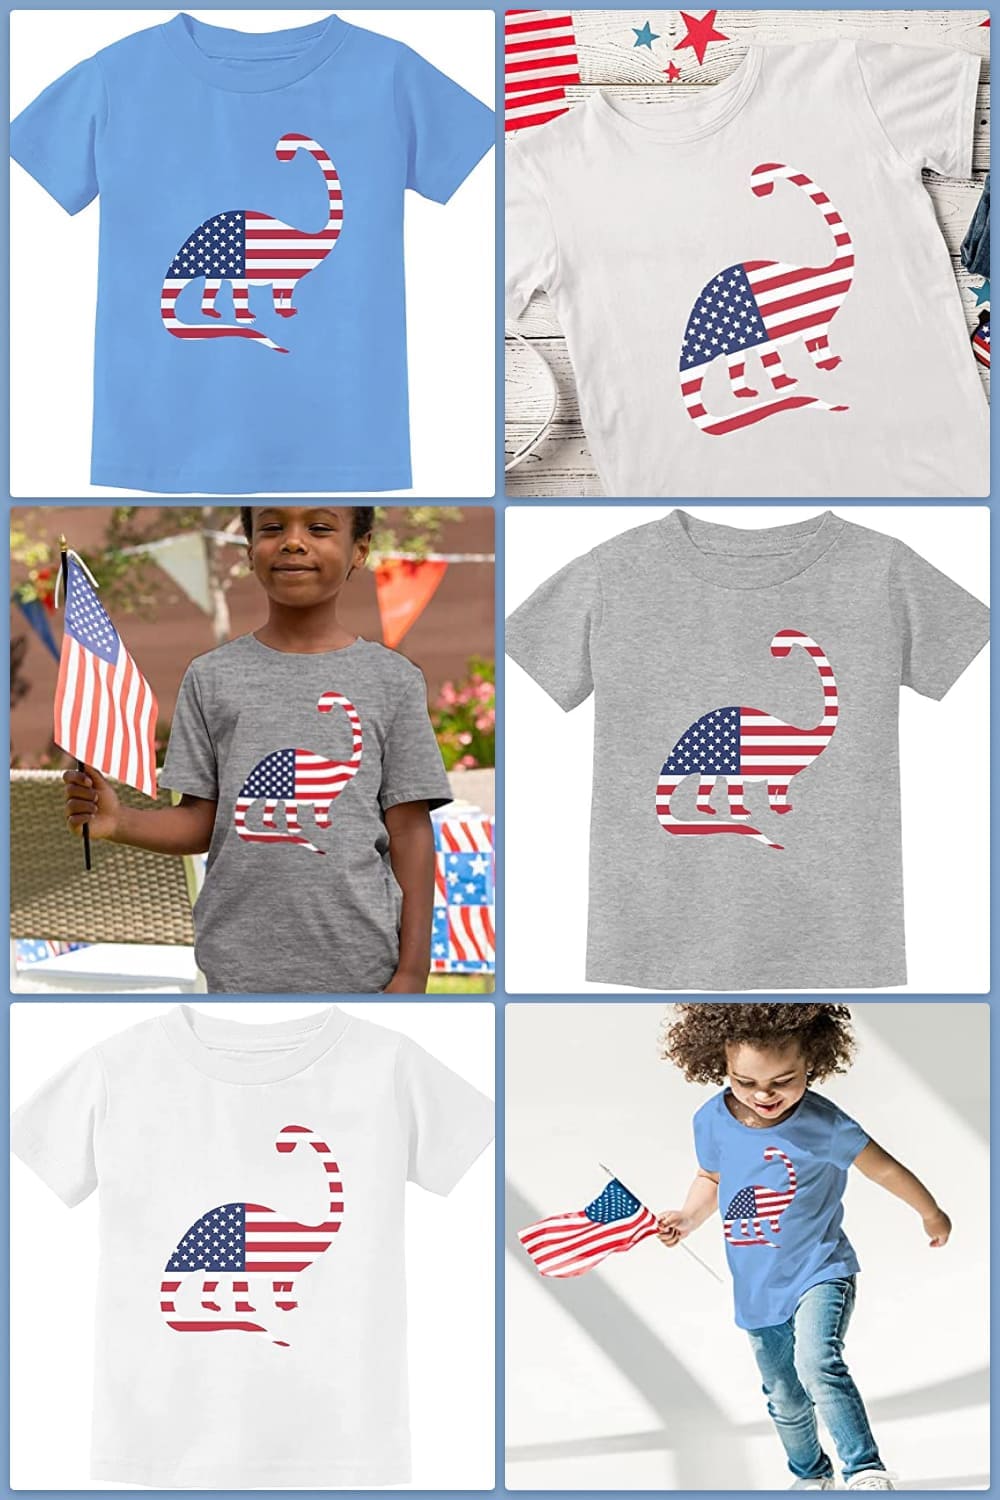 Collage of t-shirts with a dinosaur in the colors of the american flag.